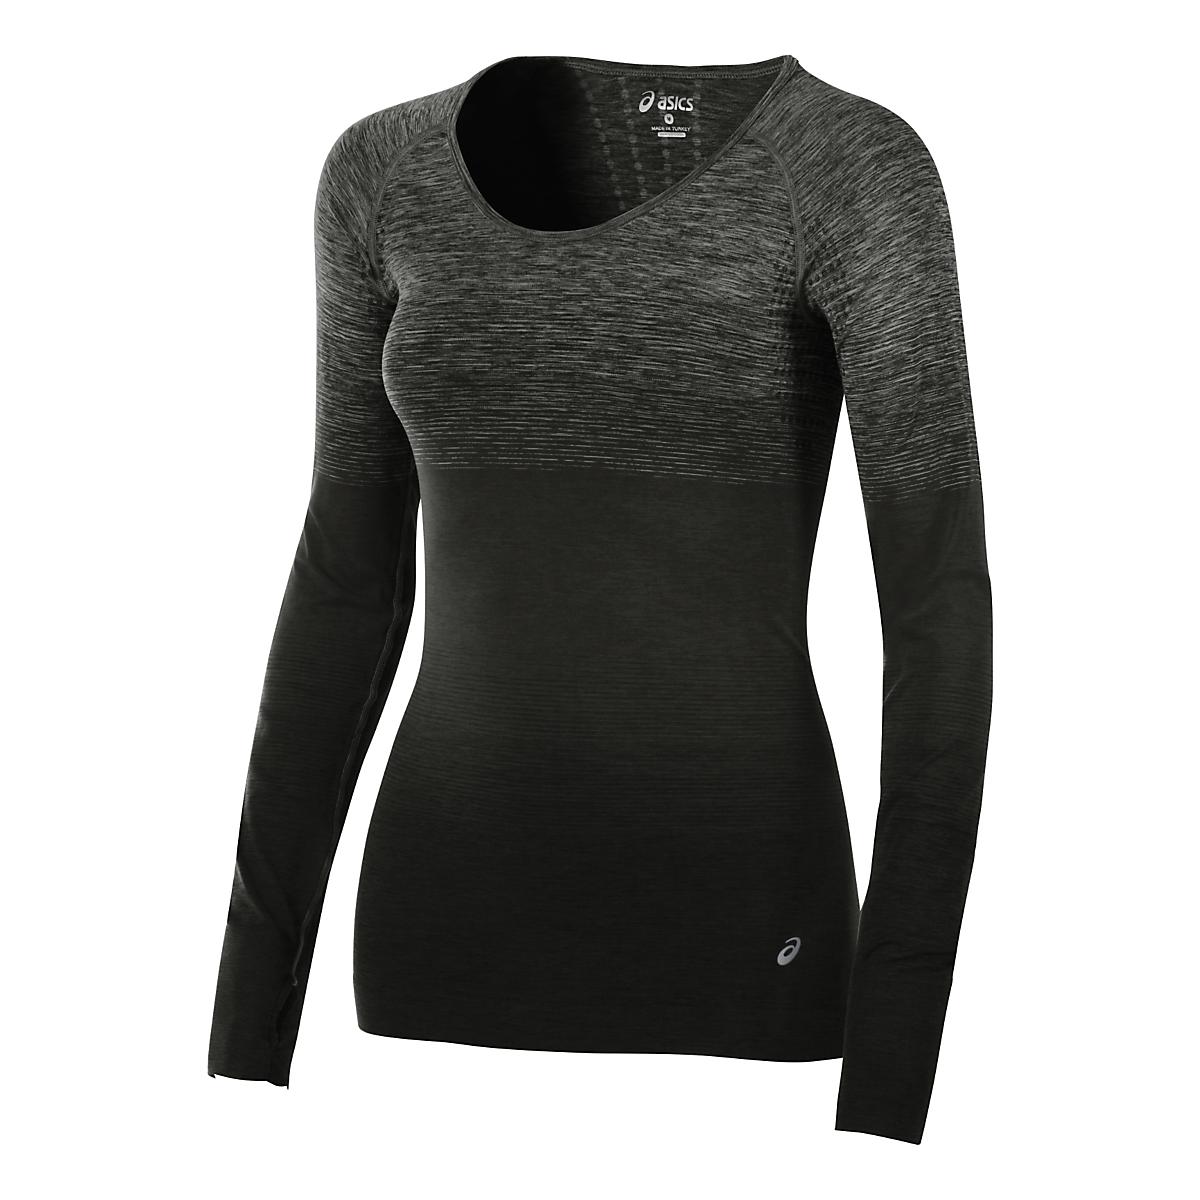 Womens ASICS Seamless Long Sleeve Technical Tops at Road Runner Sports